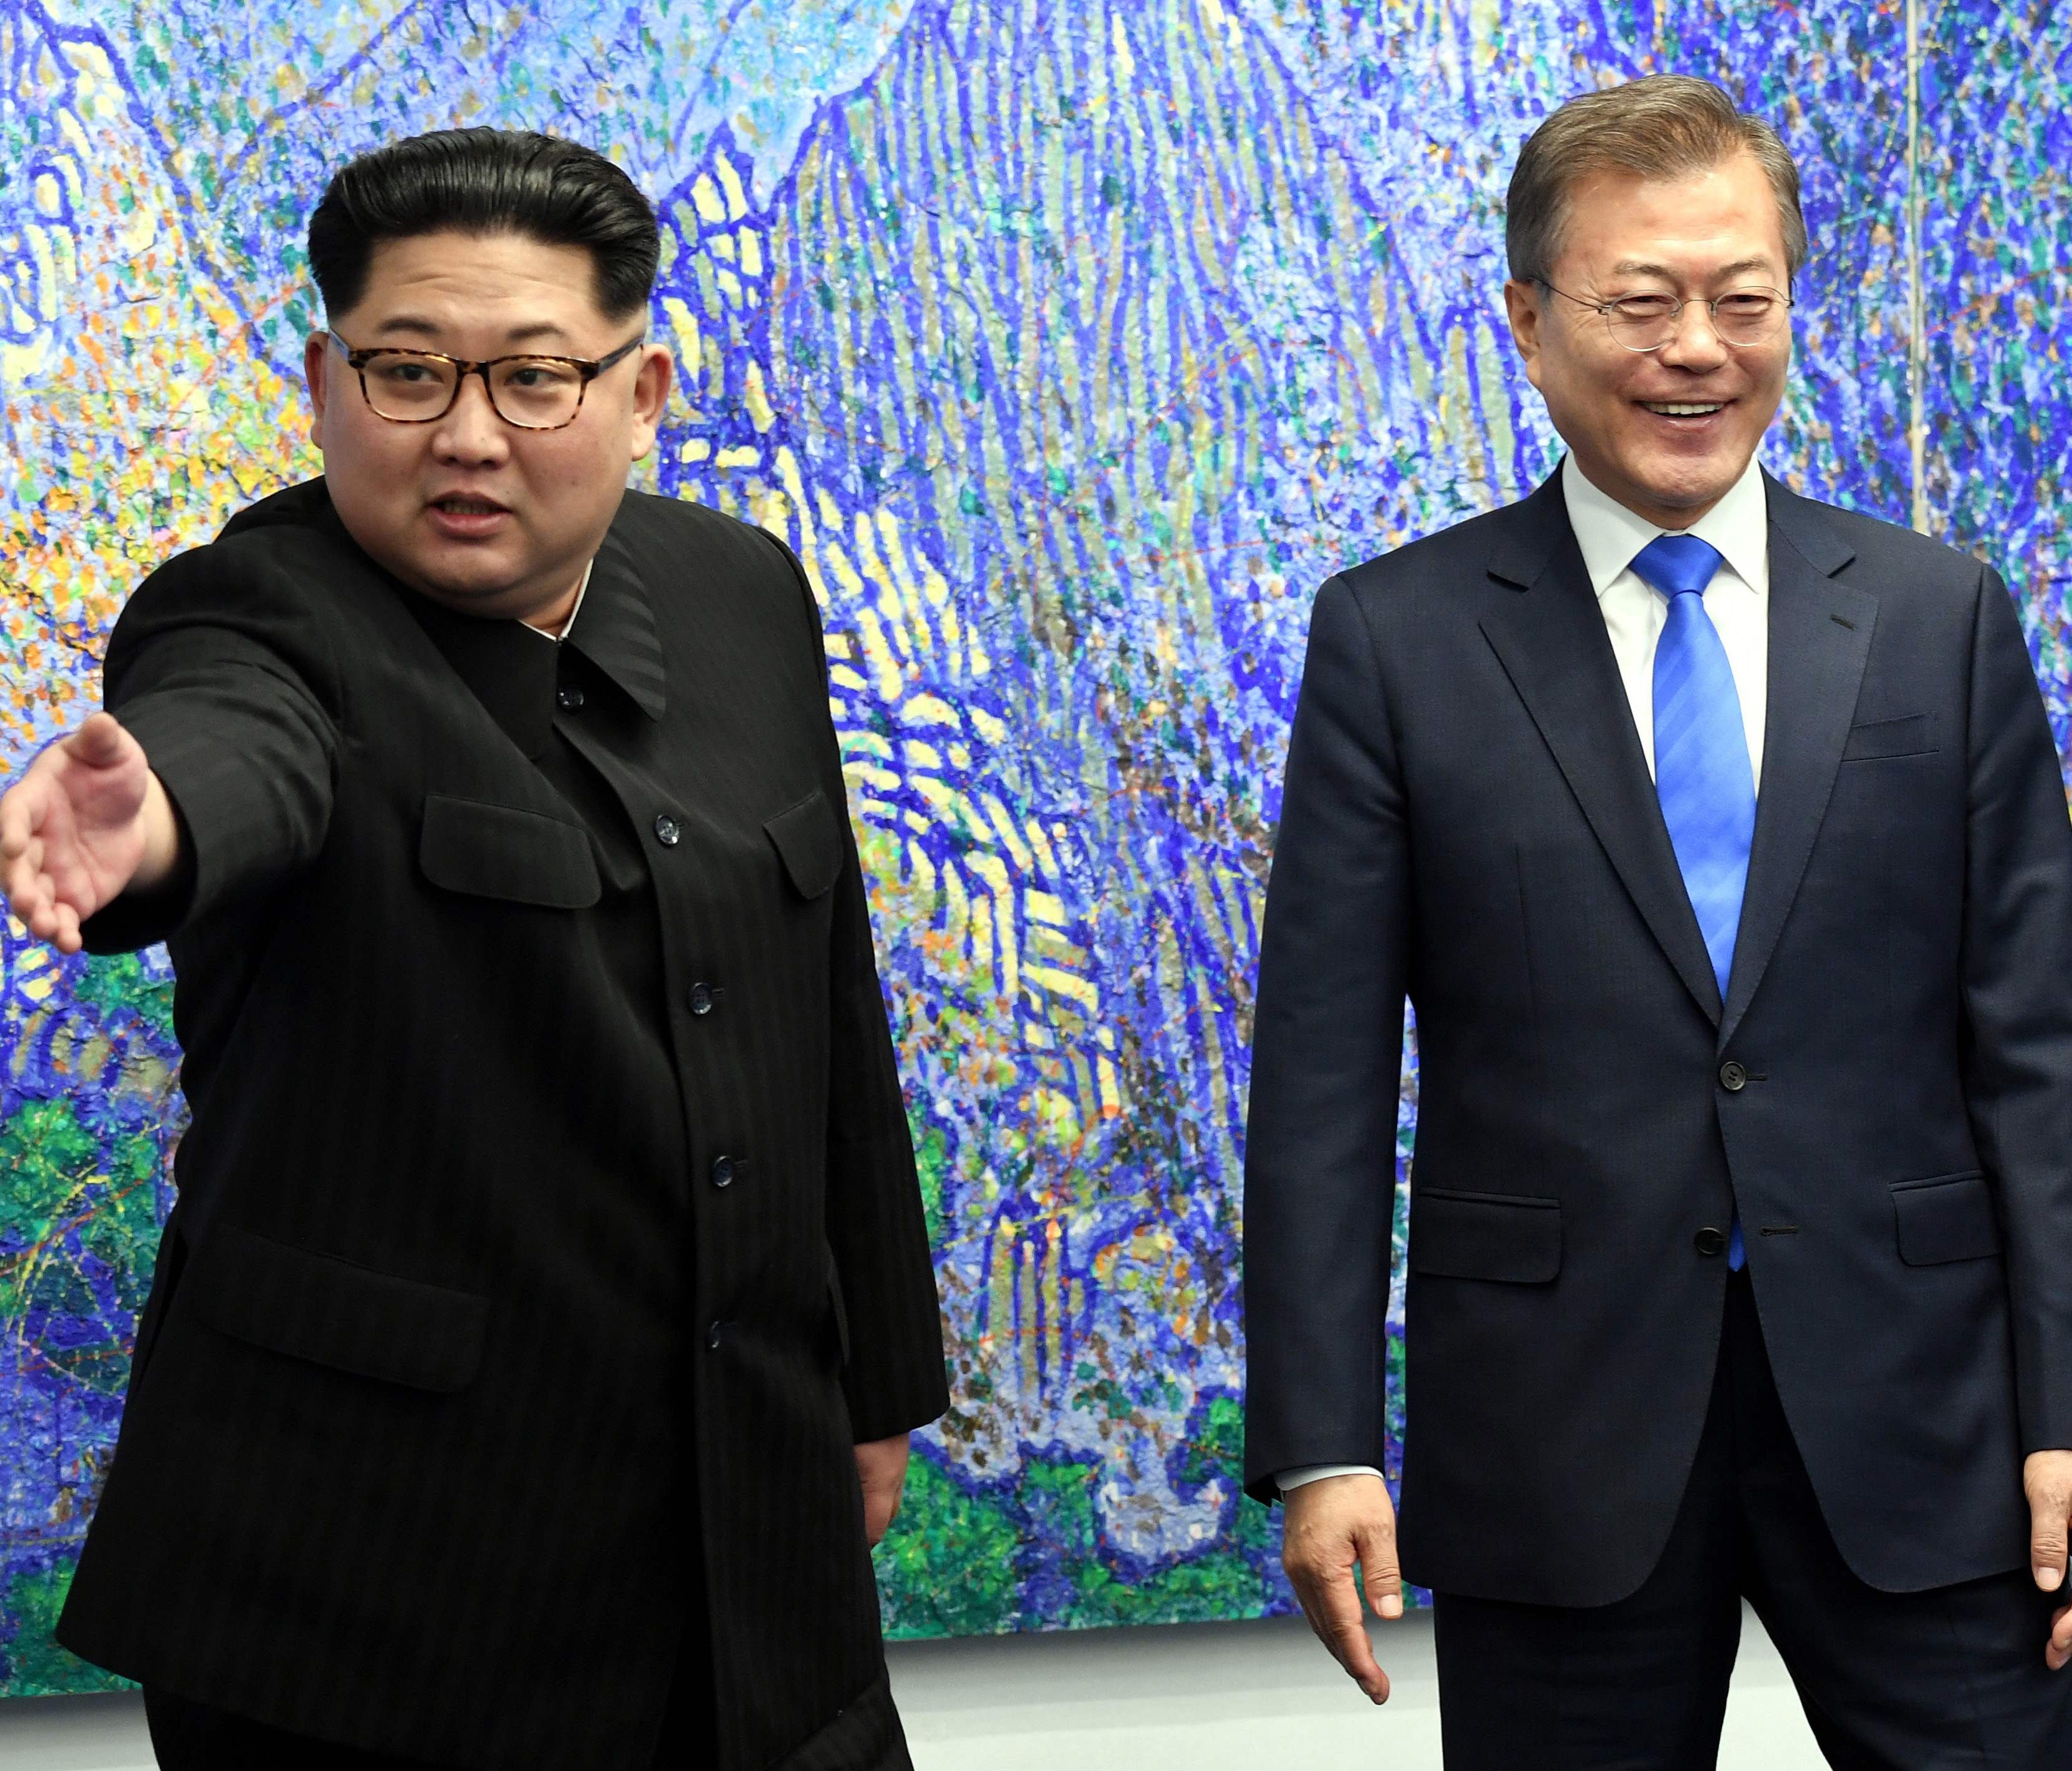 North Korea's leader Kim Jong Un (left) gestures next to South Korea's President Moon Jae-in (right) as they pose for a photo during the Inter-Korean summit in the Peace House building on the southern side of the truce village of Panmunjom.